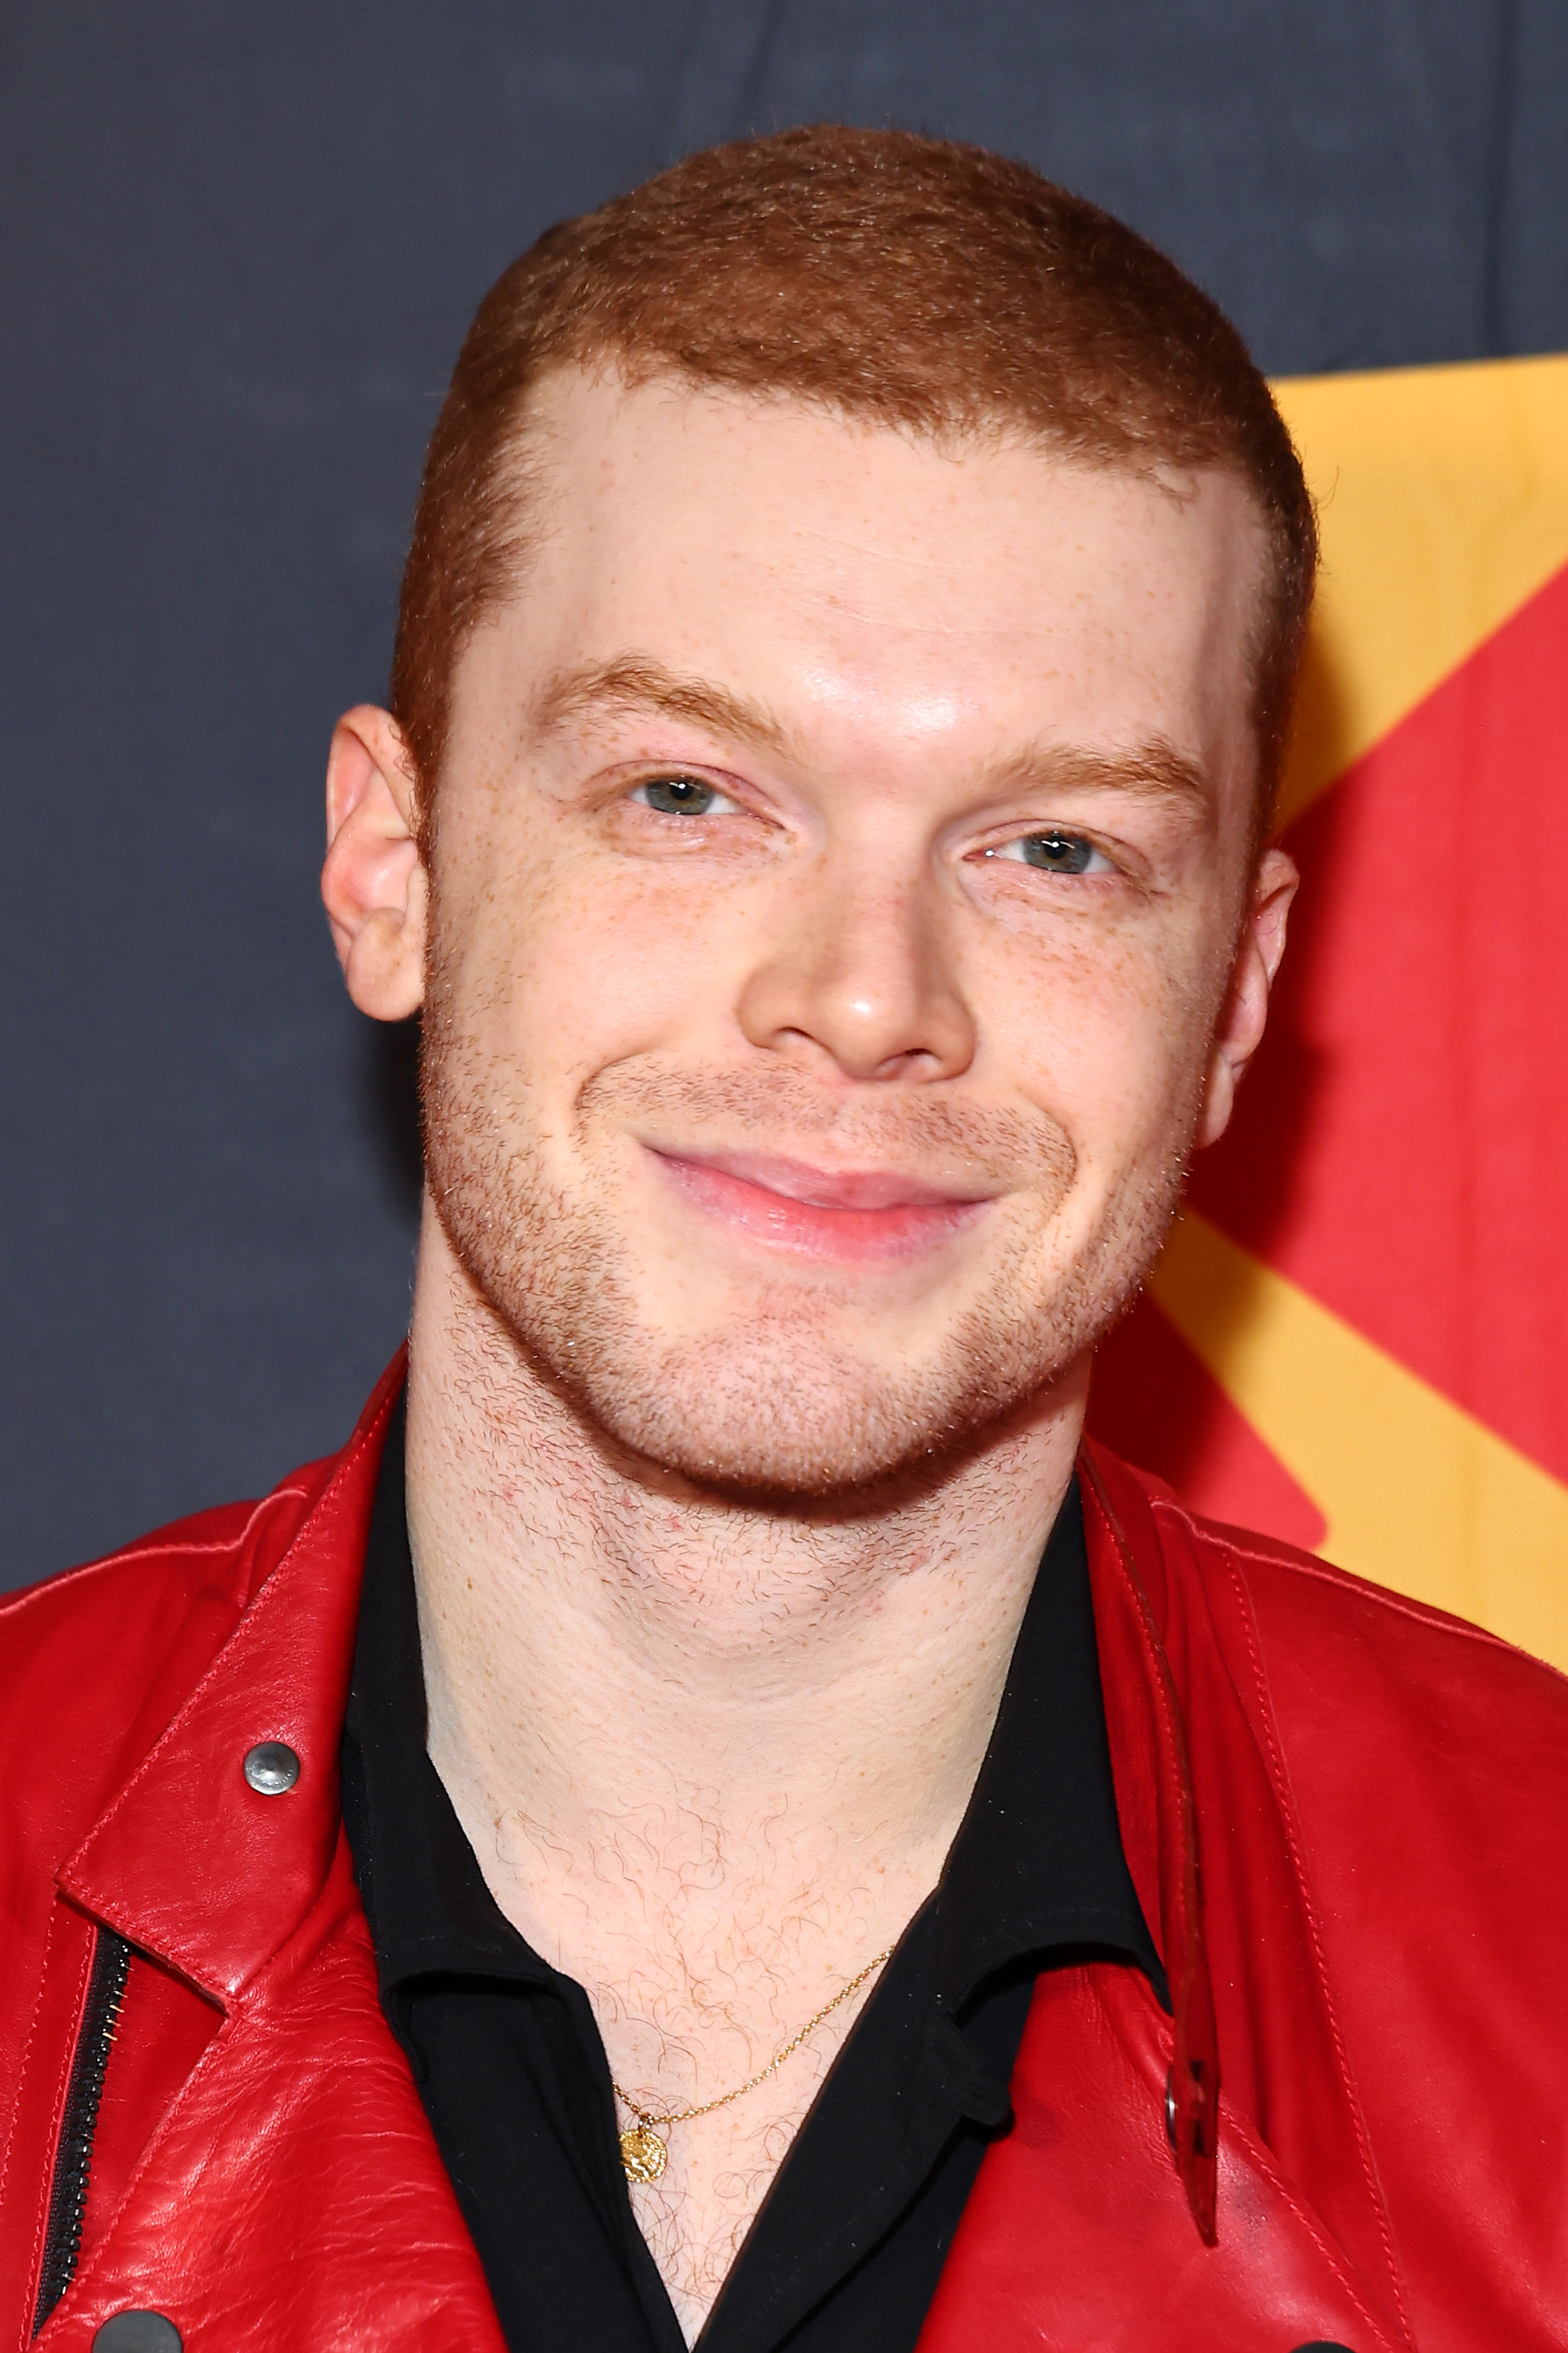 Cameron Monaghan at the 2023 KODAK Film Awards at ASC Clubhouse on February 26, 2023, in Los Angeles, California. | Source: Getty Images